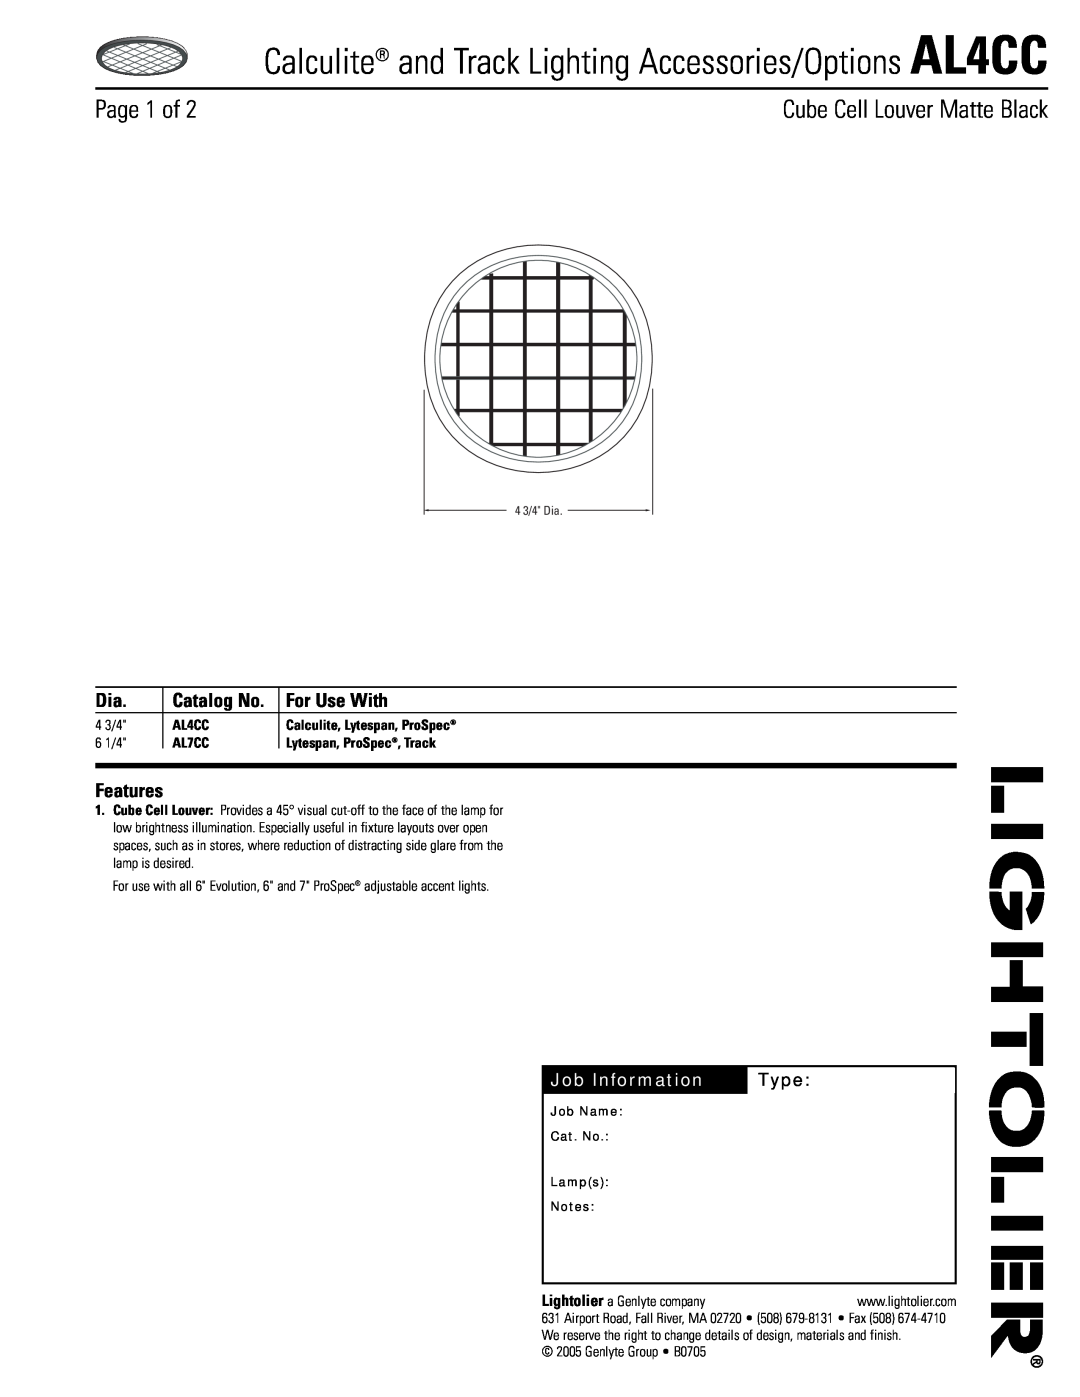 Lightolier AL4CC manual For Use With, Features, Job Information, Type, Page 1 of, Cube Cell Louver Matte Black, Catalog No 